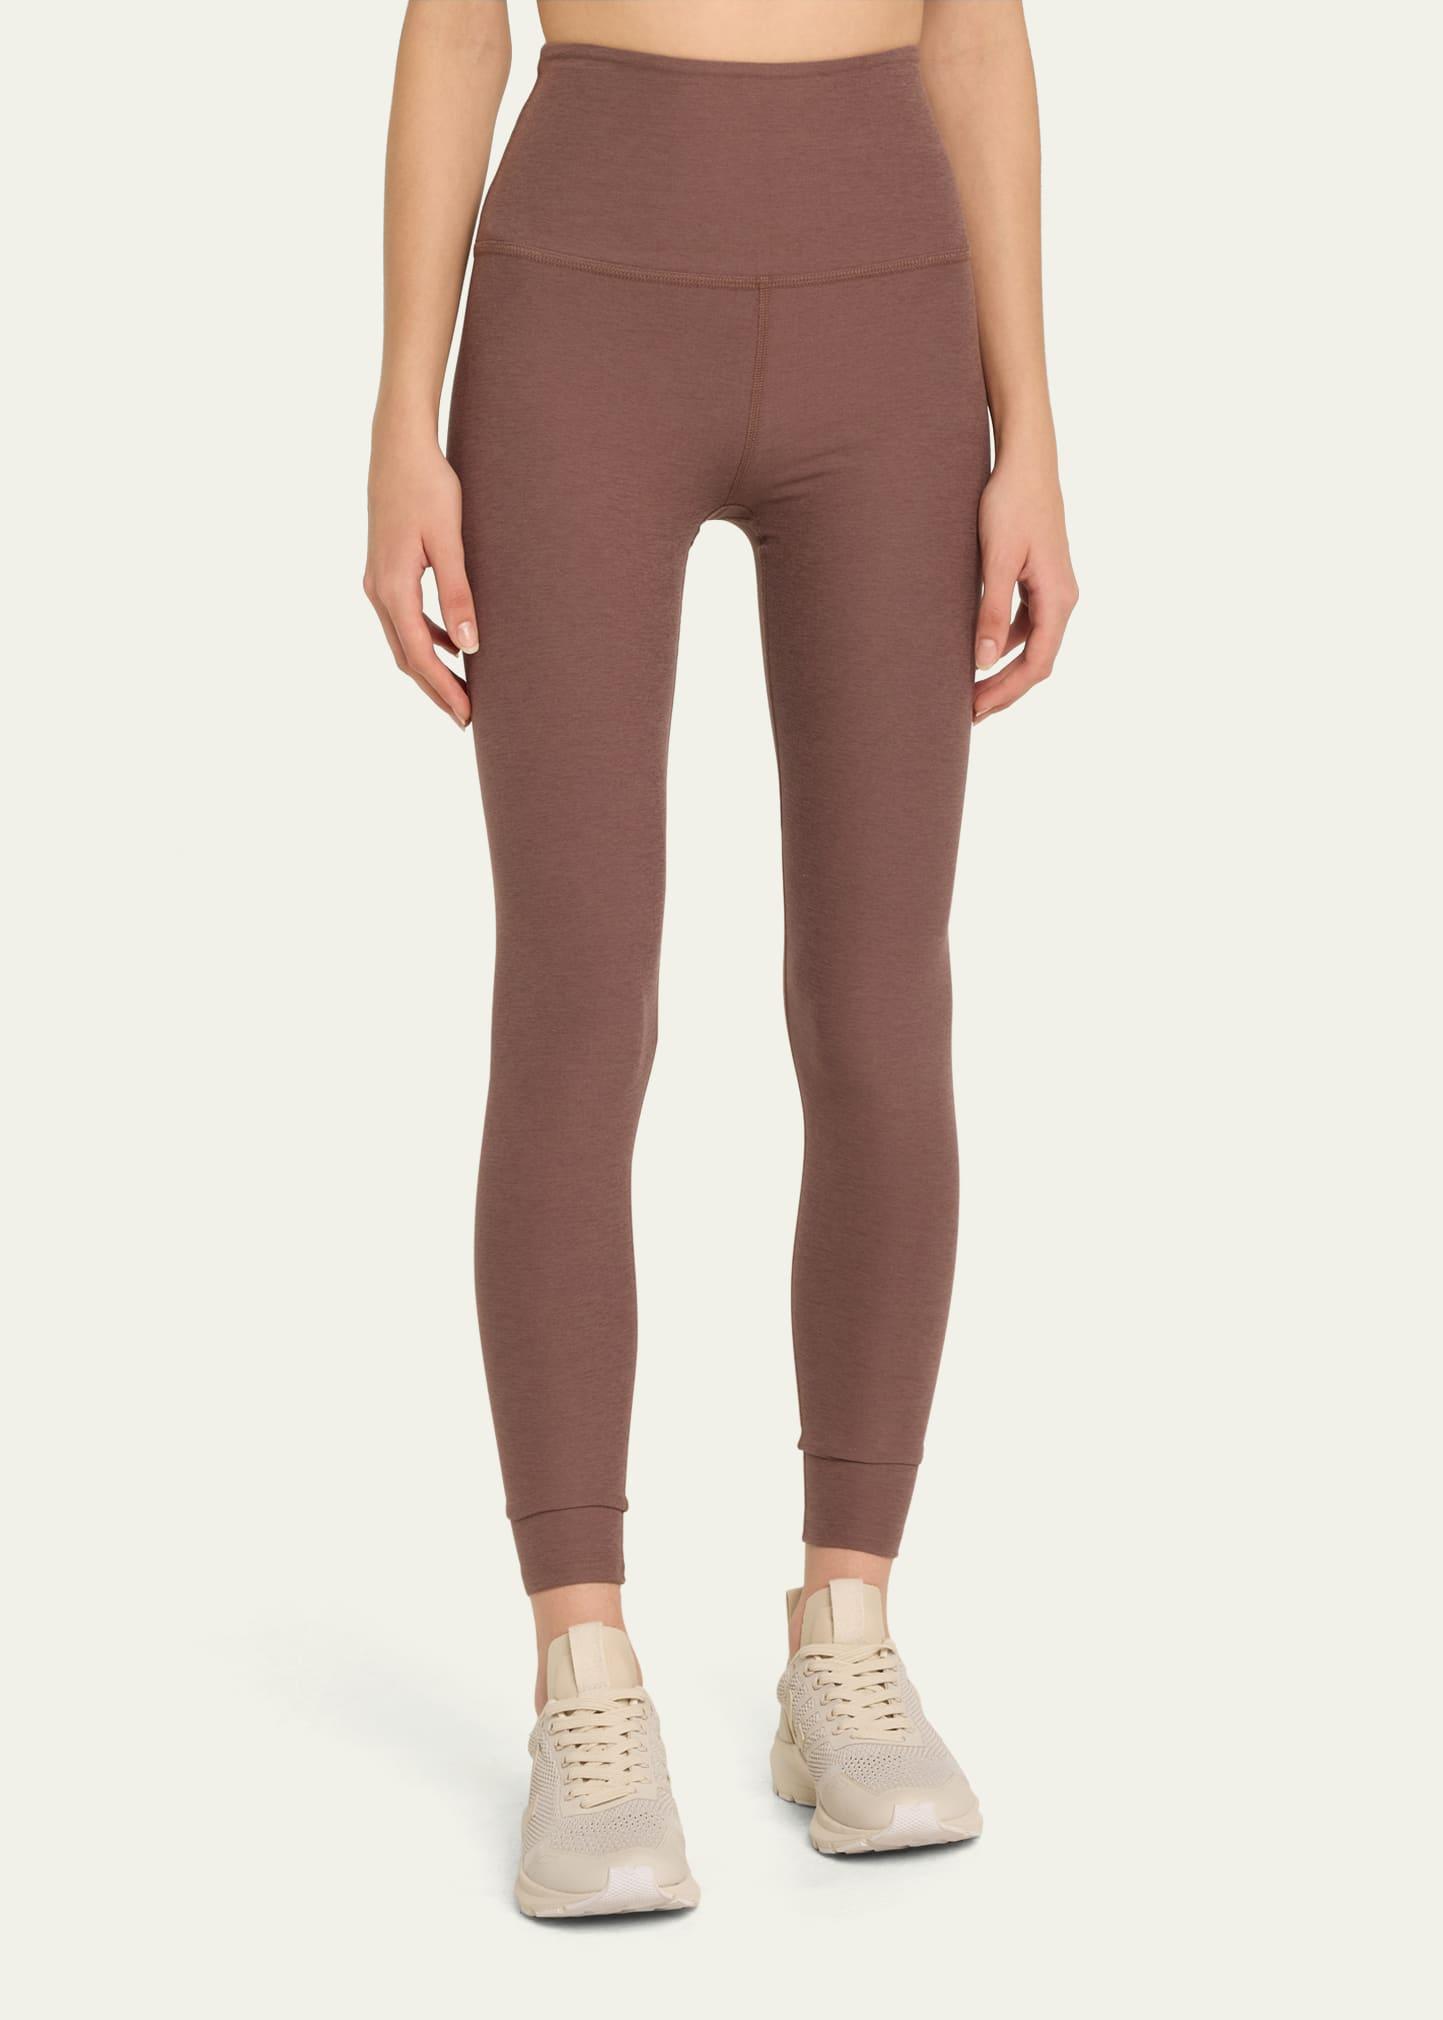 Beyond Yoga Caught In The Midi High-waist Space-dye Leggings in Natural